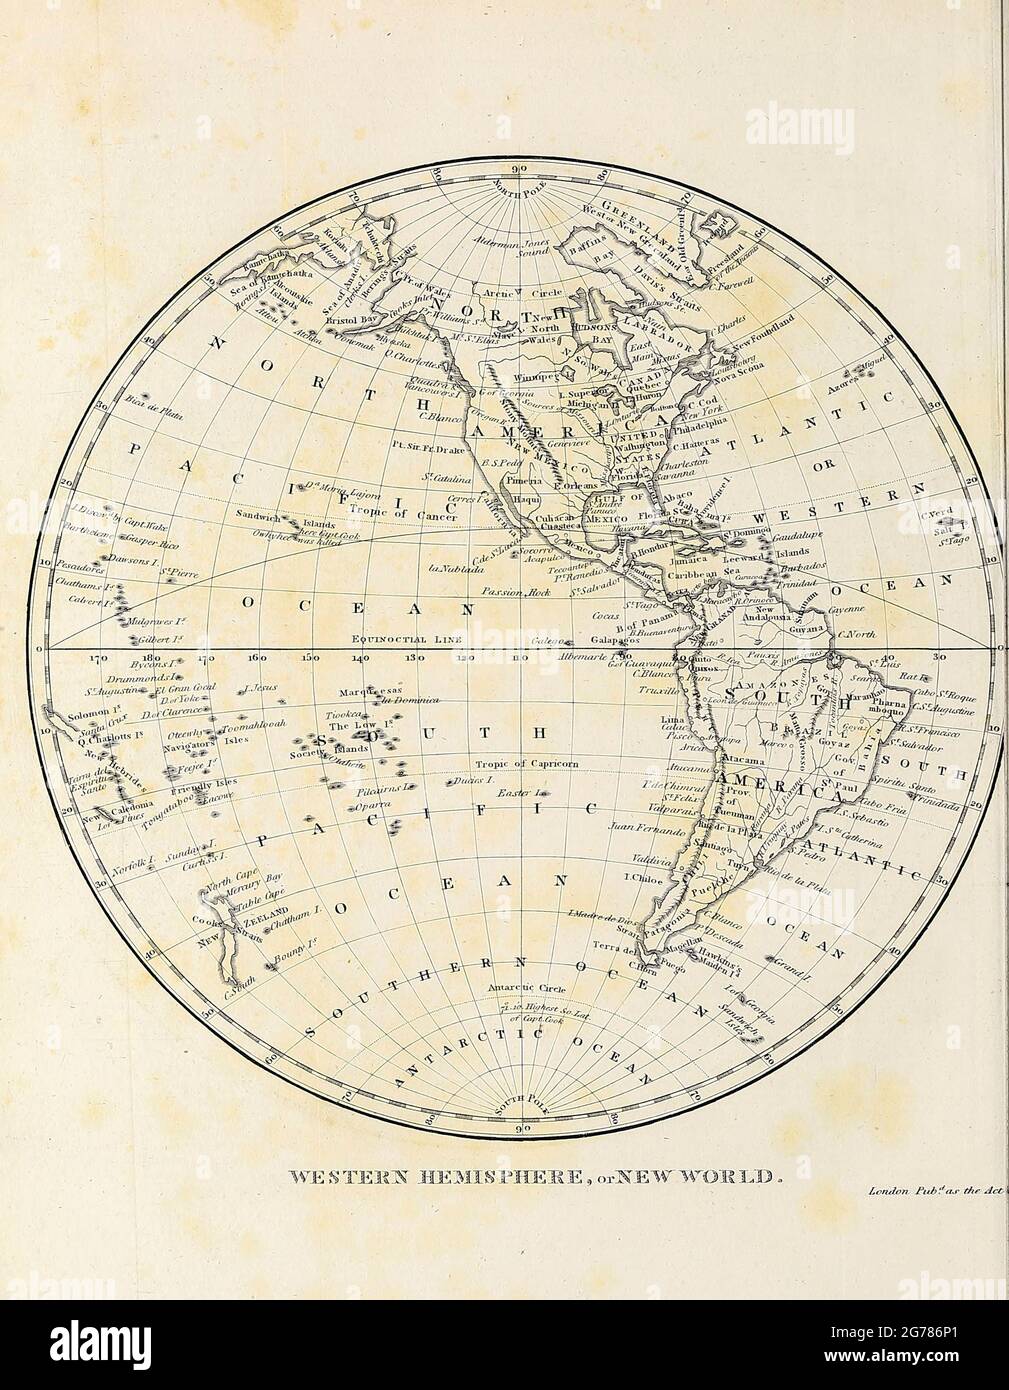 Western Hemisphere New World Copperplate engraving From the Encyclopaedia Londinensis or, Universal dictionary of arts, sciences, and literature; Volume VIII;  Edited by Wilkes, John. Published in London in 1810. Stock Photo